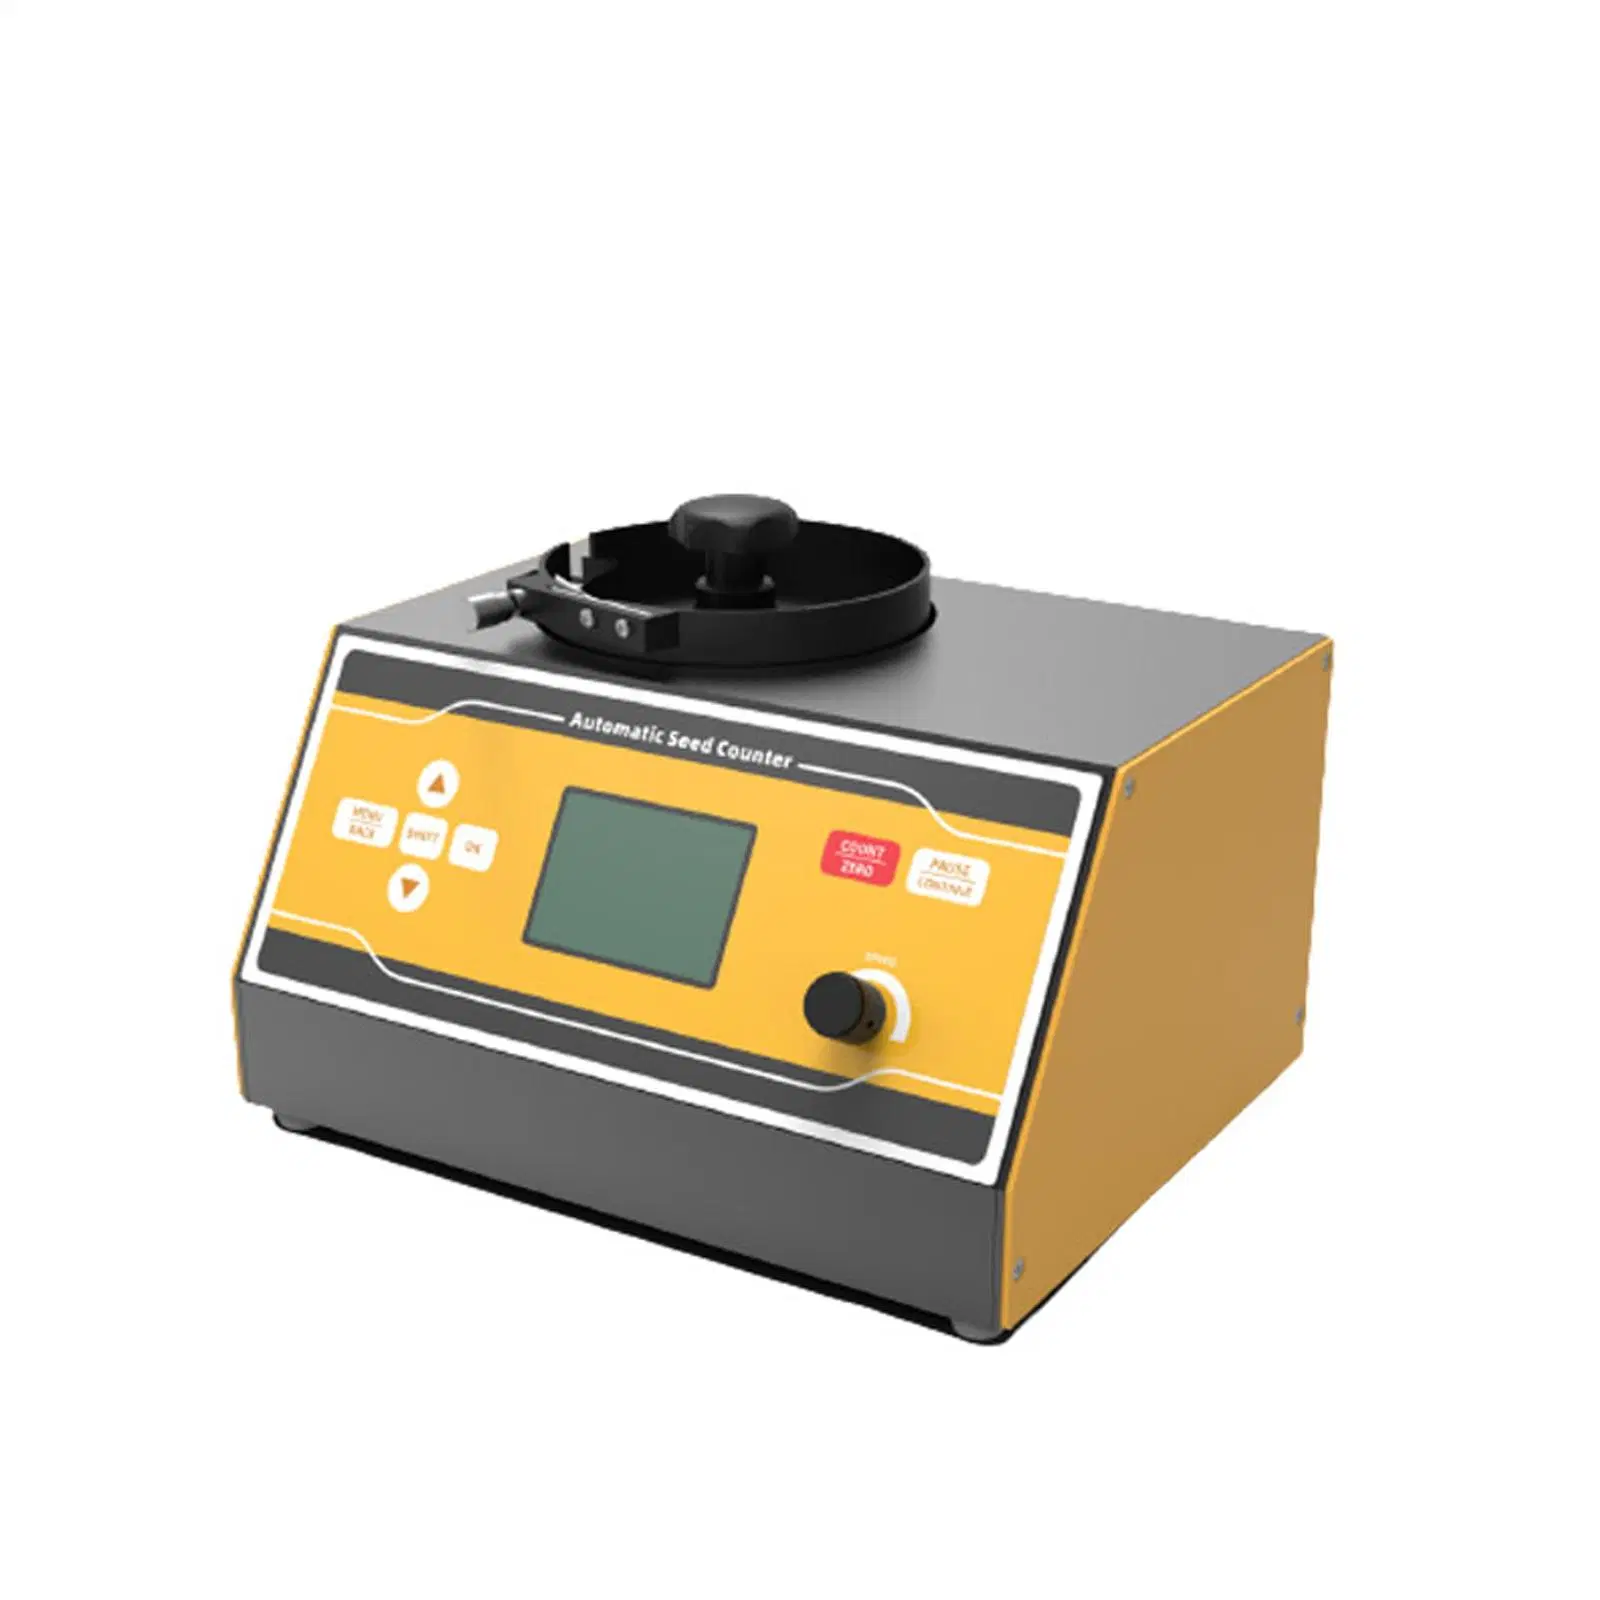 Sly-C Plus Digital Automatic Seed Counter